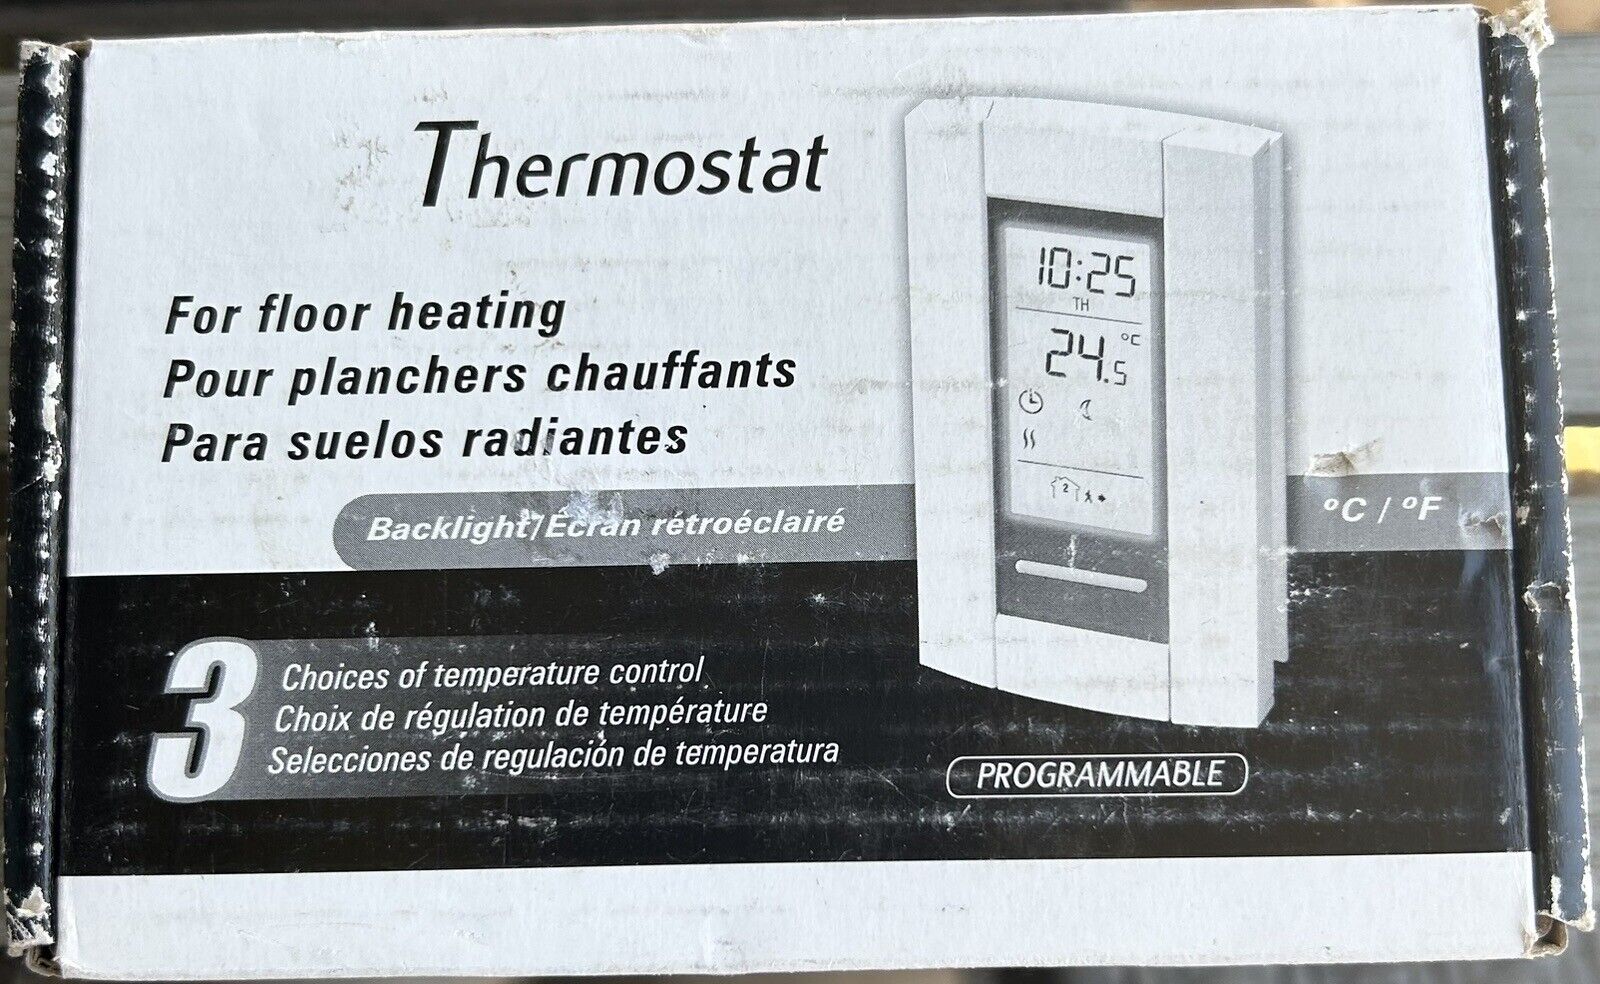 Honeywell TH115-AF-240GB Aube Programmable Thermostat Electric Radiant Floor